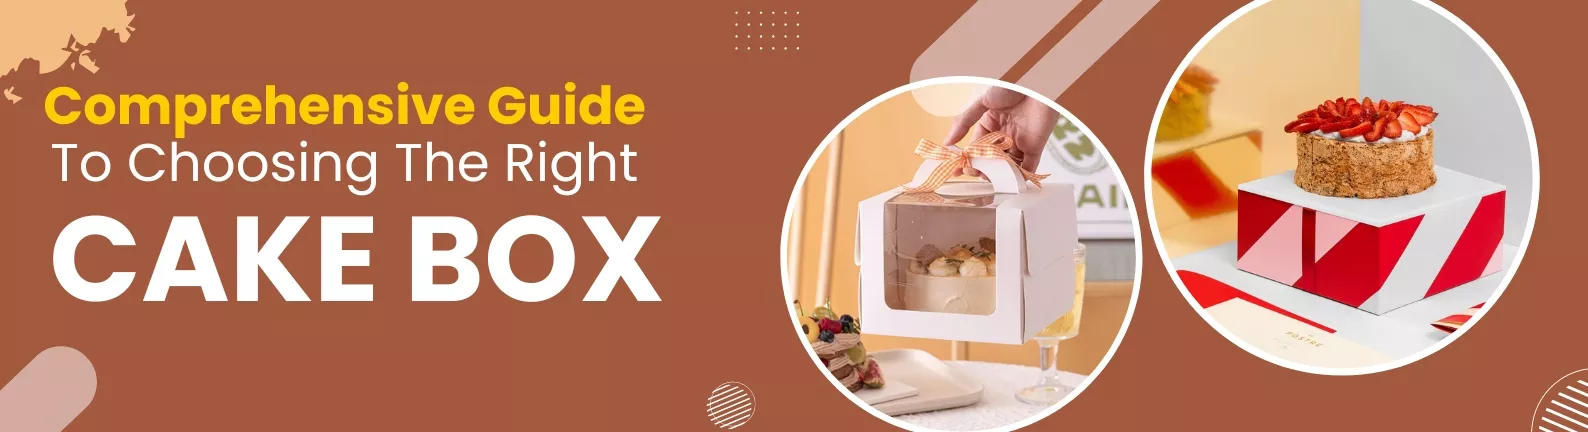 Comprehensive Guide To Choosing The Right Cake Boxes